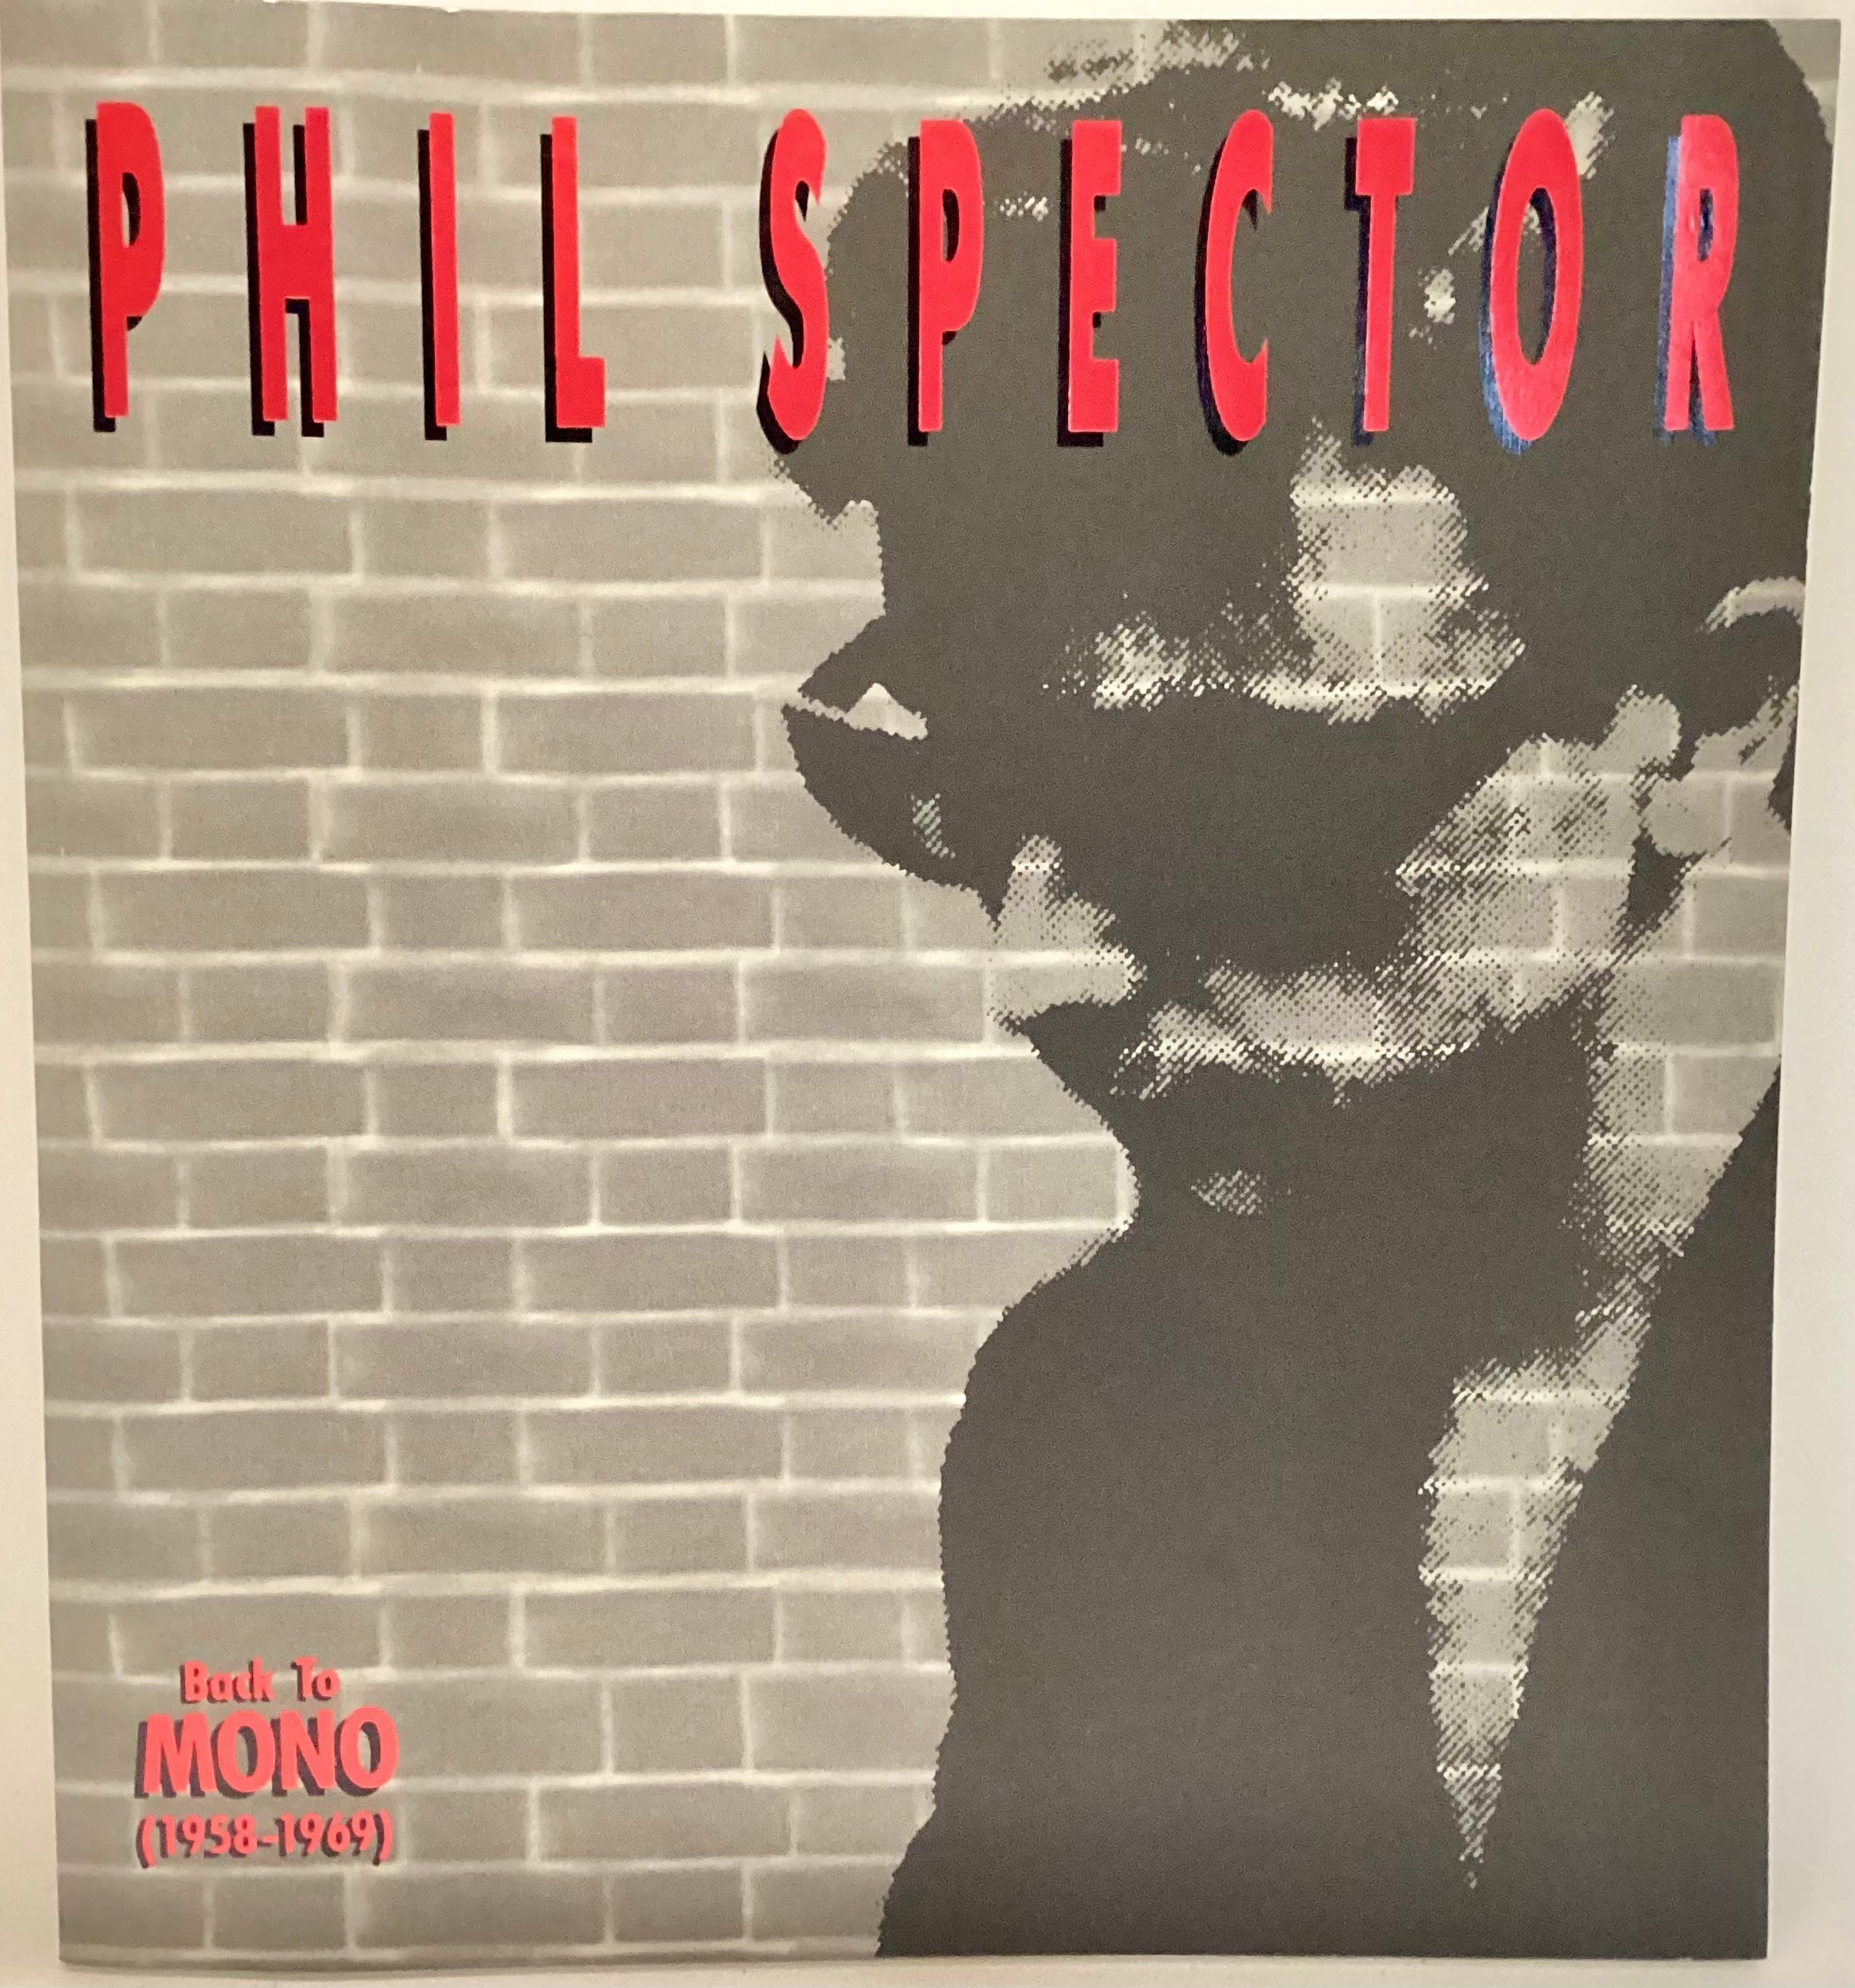 PHIL SPECTOR - BACK TO MONO (1958-1969) 5LP BOX SET. Phil Spector: Back To Mono 1958-1969 is a - Image 8 of 8